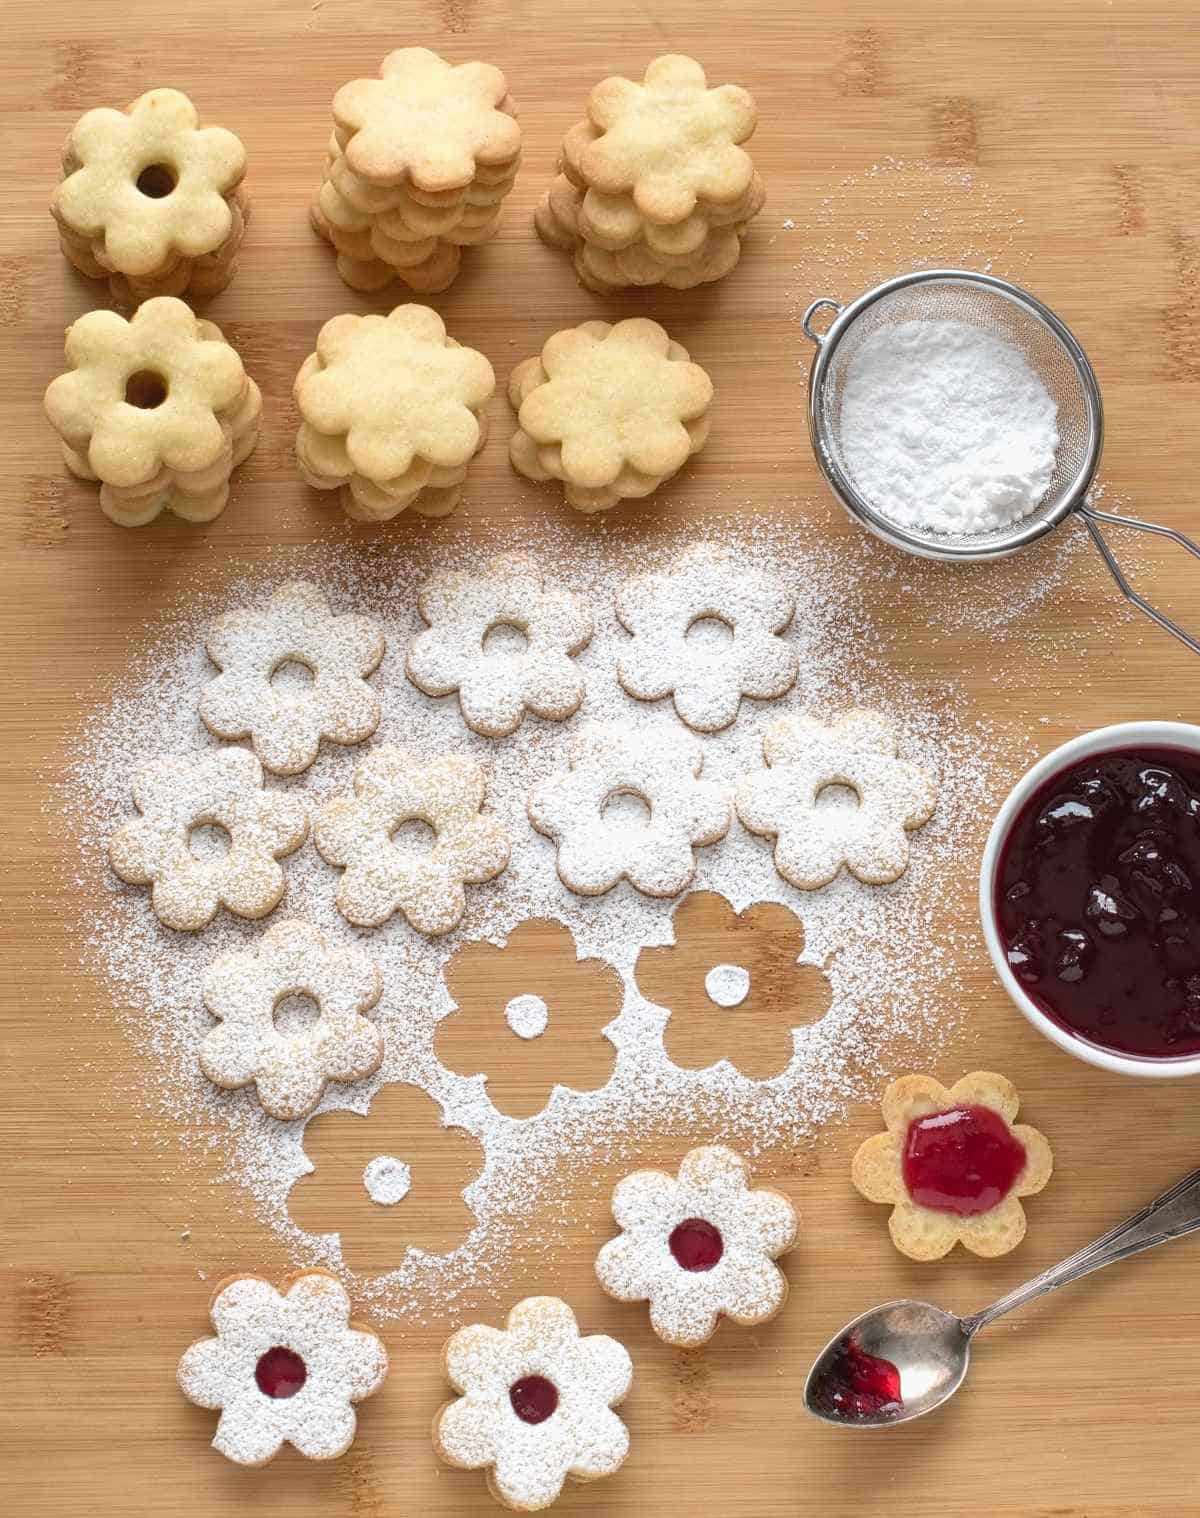 Assembling Linzer cookies dusted with powdered sugar, with red currant jam.